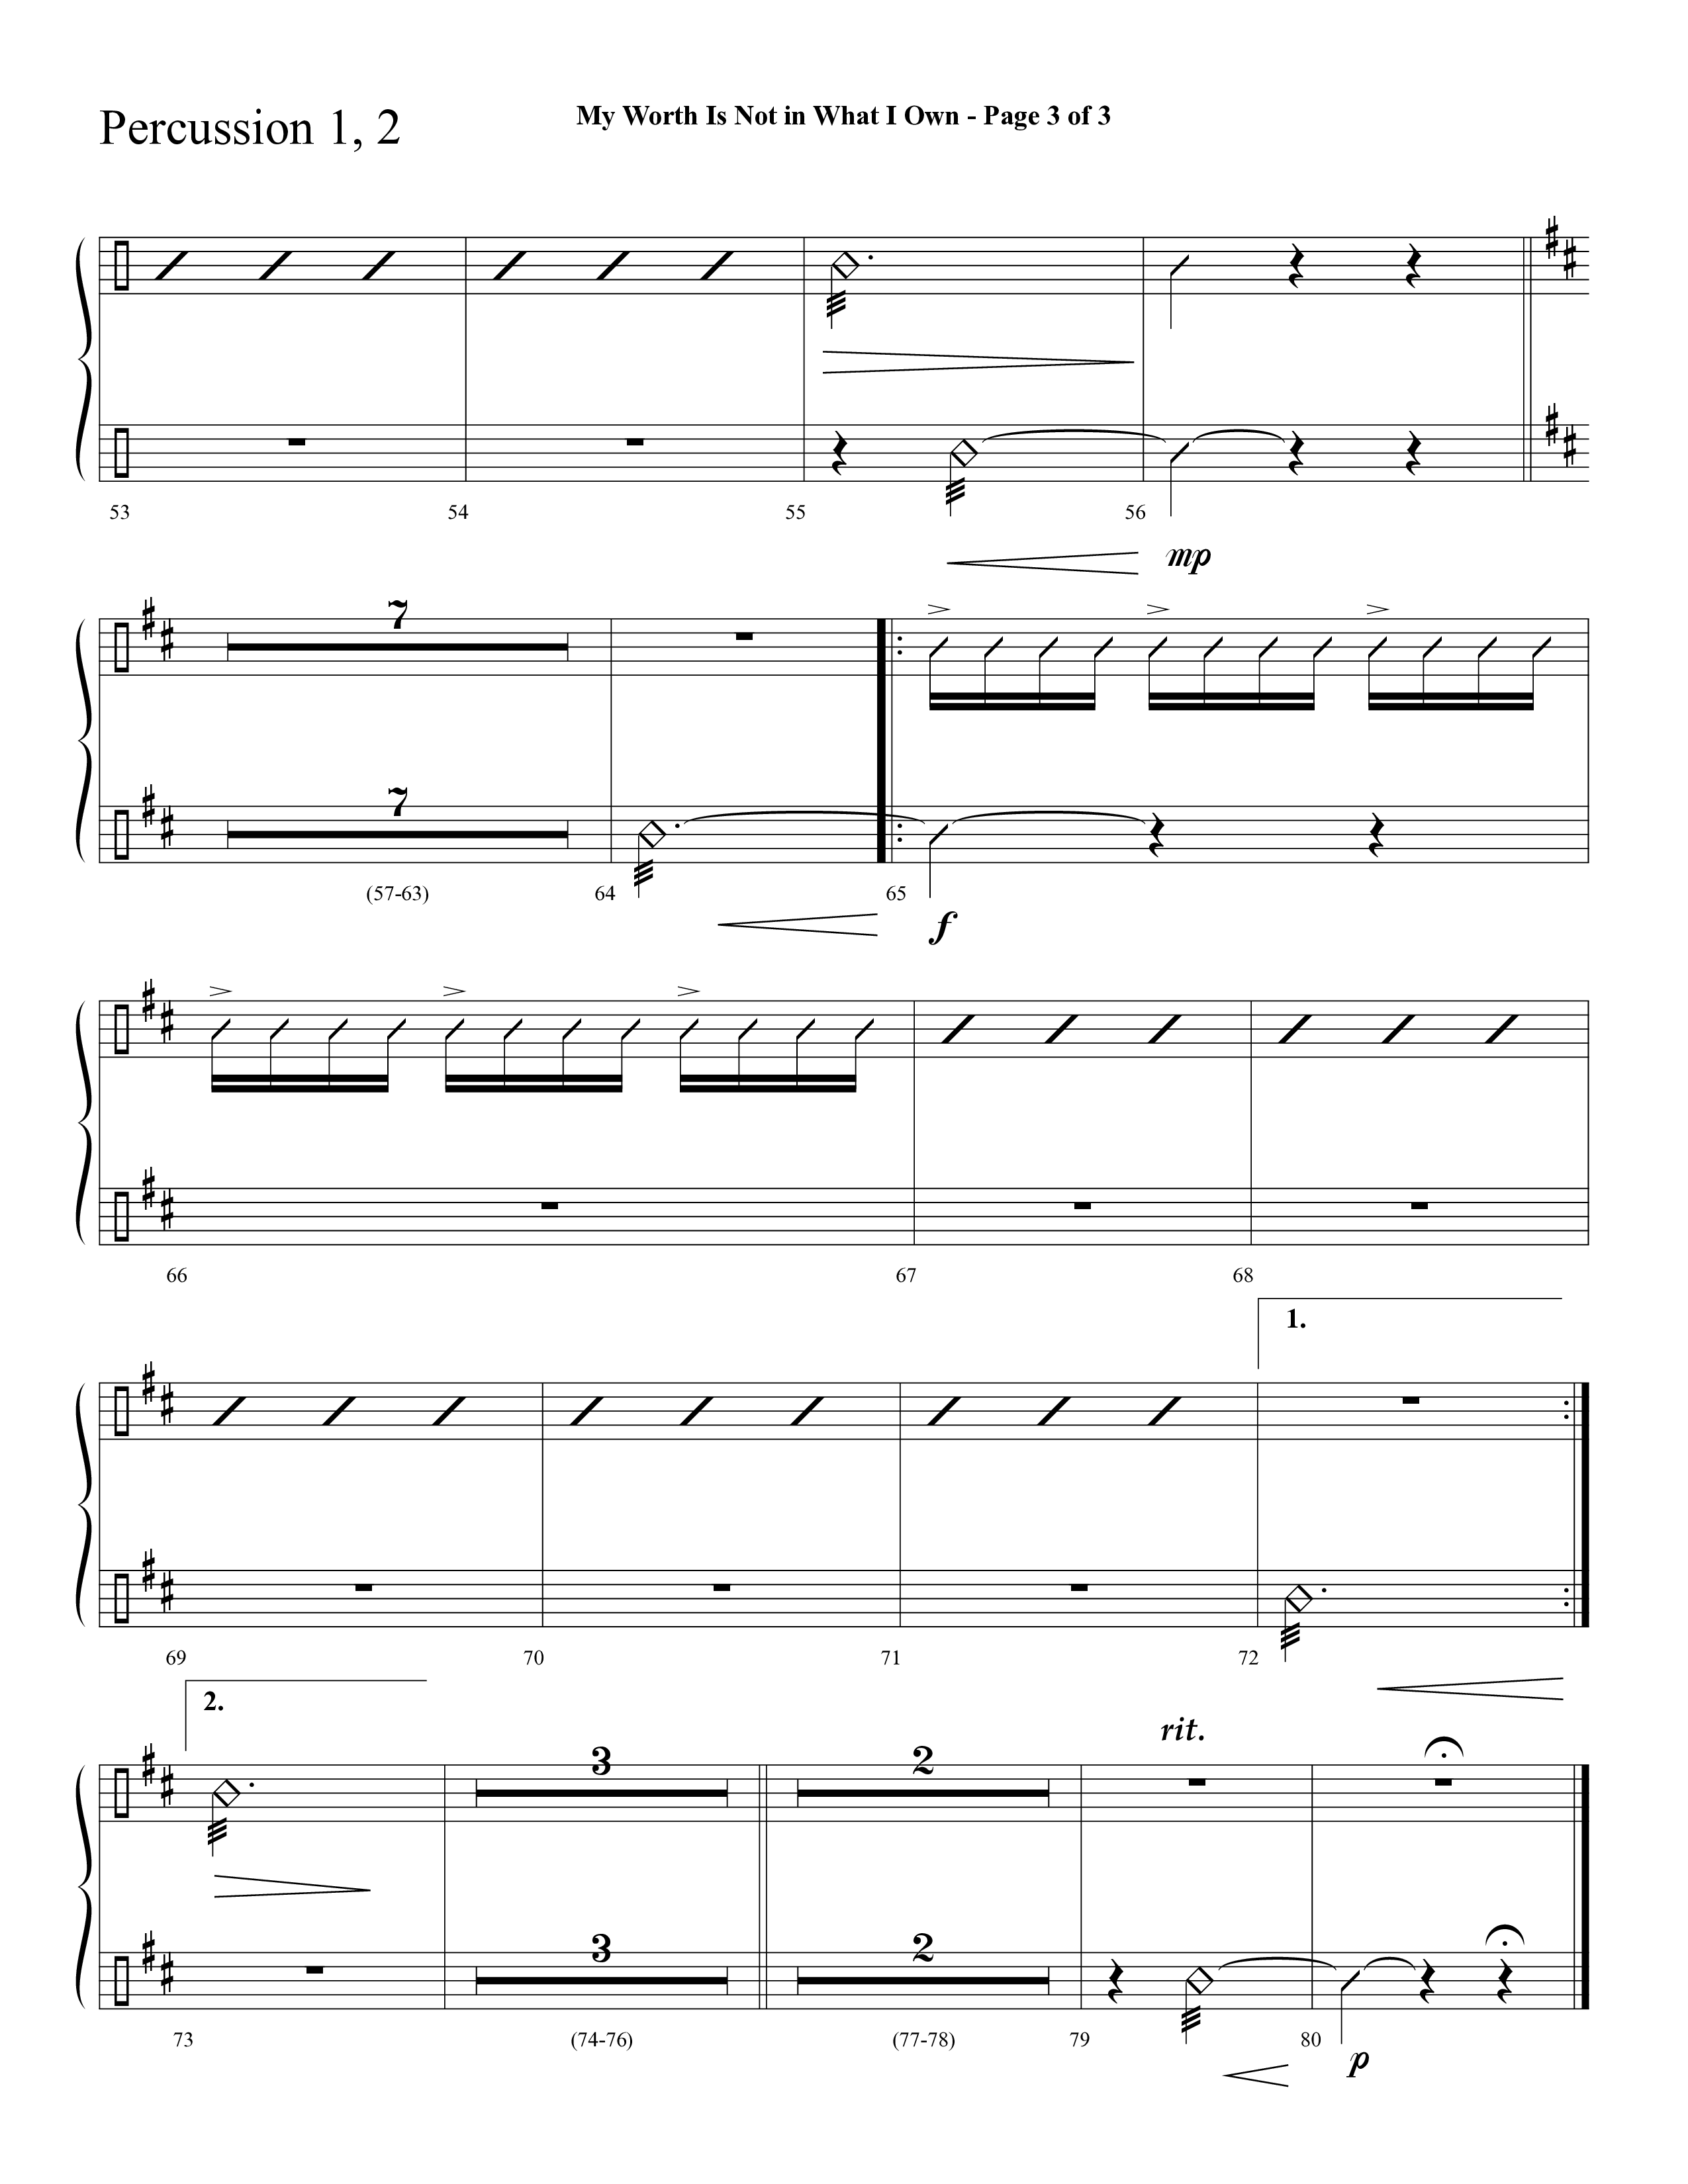 My Worth Is Not In What I Own (Choral Anthem SATB) Percussion 1/2 (Lifeway Choral / Arr. David Hamilton)